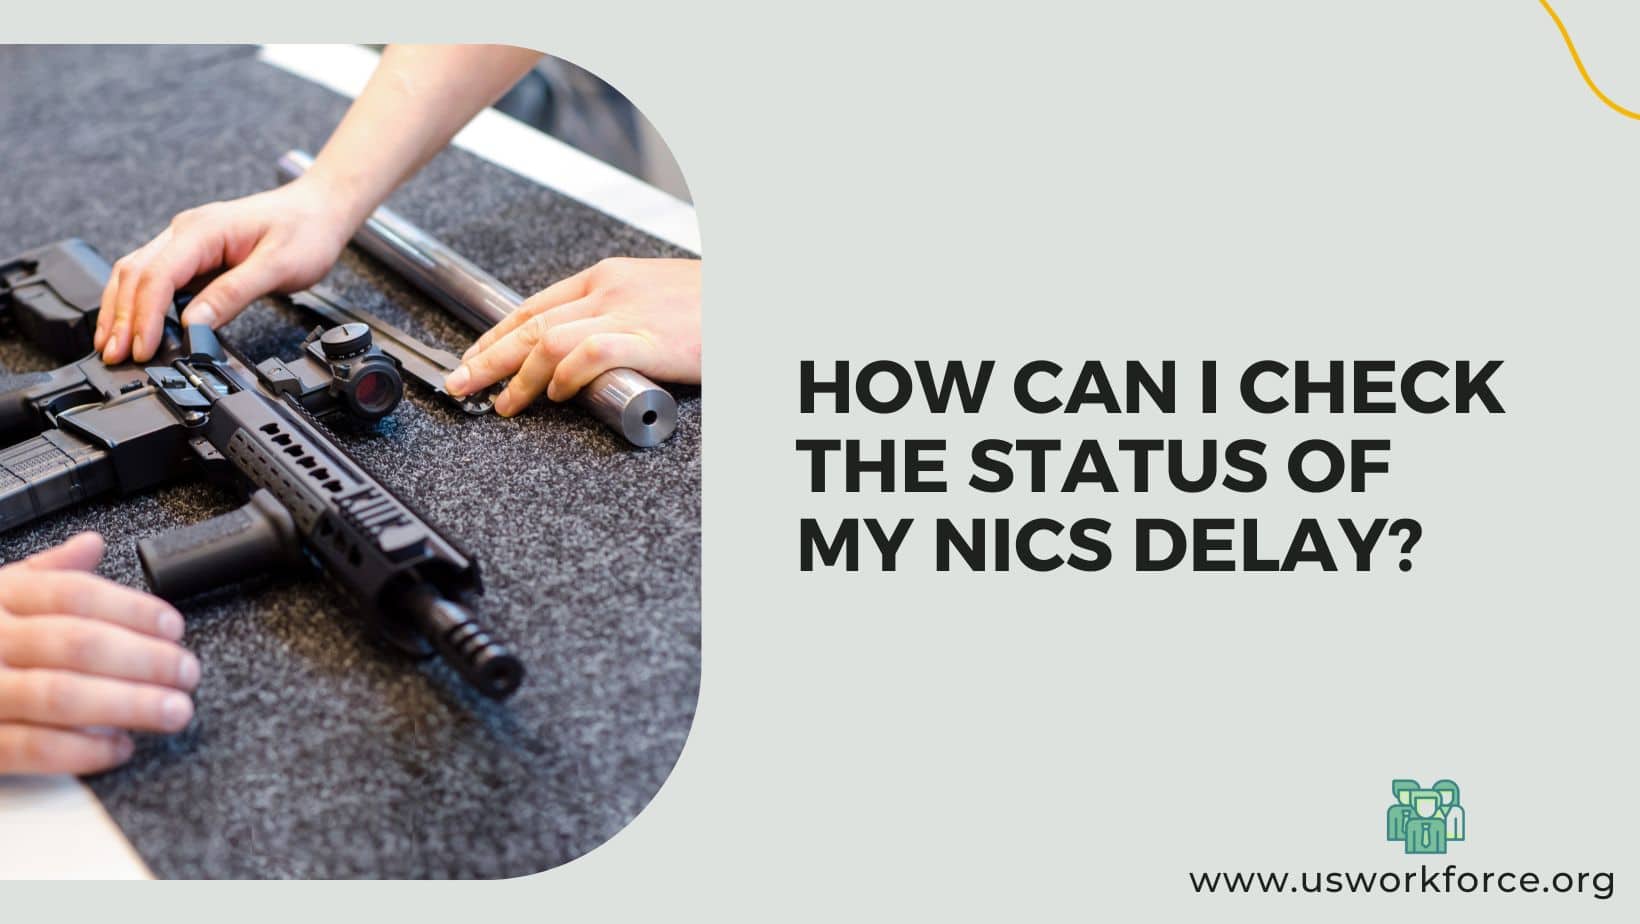 How Can I Check The Status Of My NICS Delay?